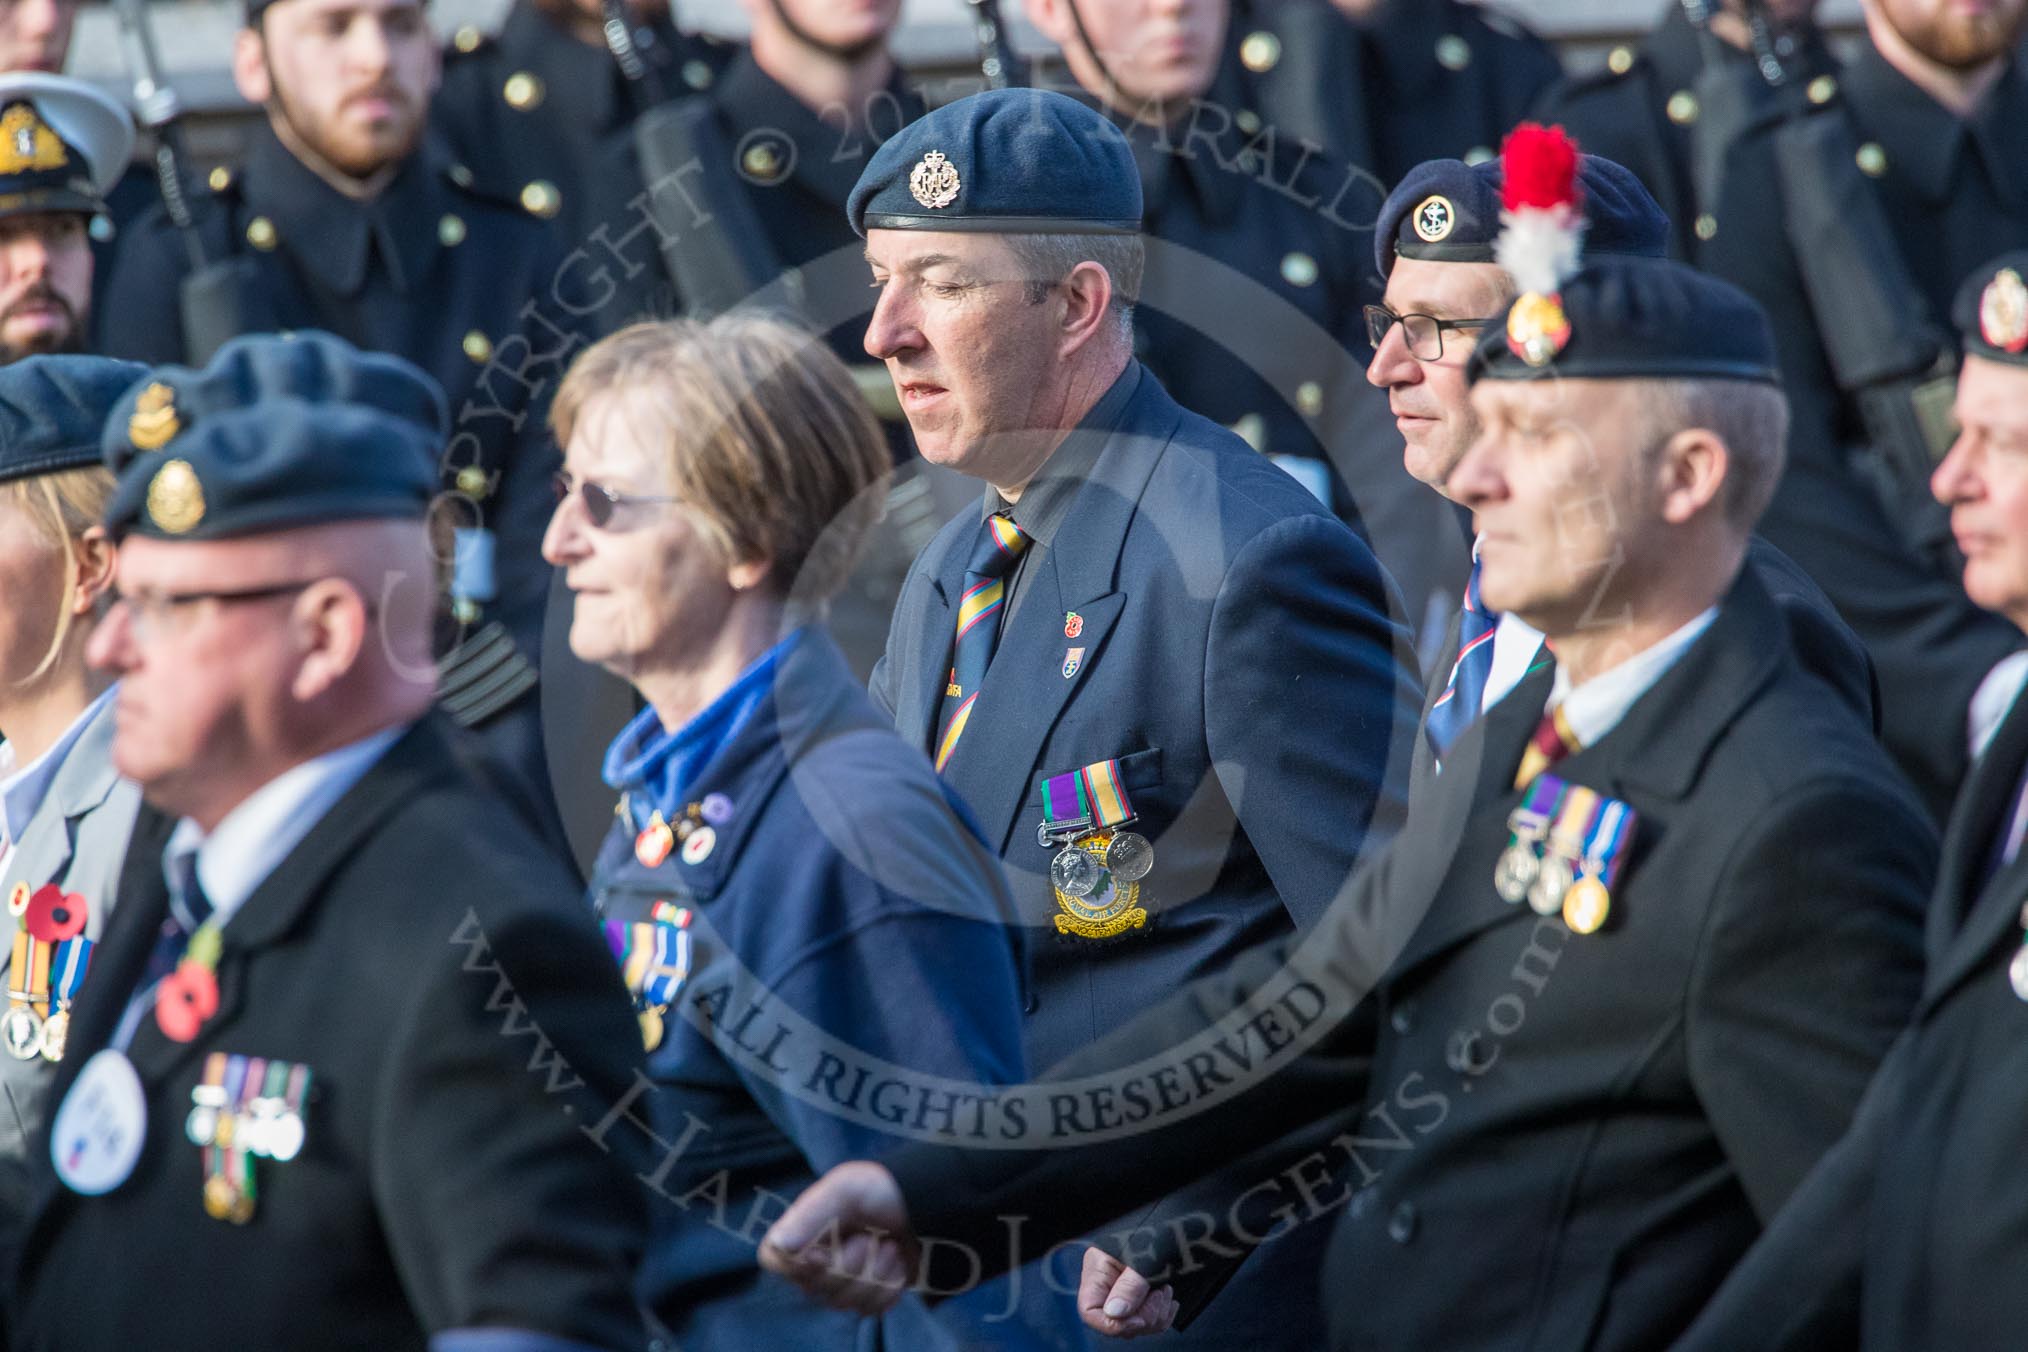 National Gulf Veterans and Families Association (Group F14, 25 members) during the Royal British Legion March Past on Remembrance Sunday at the Cenotaph, Whitehall, Westminster, London, 11 November 2018, 11:52.